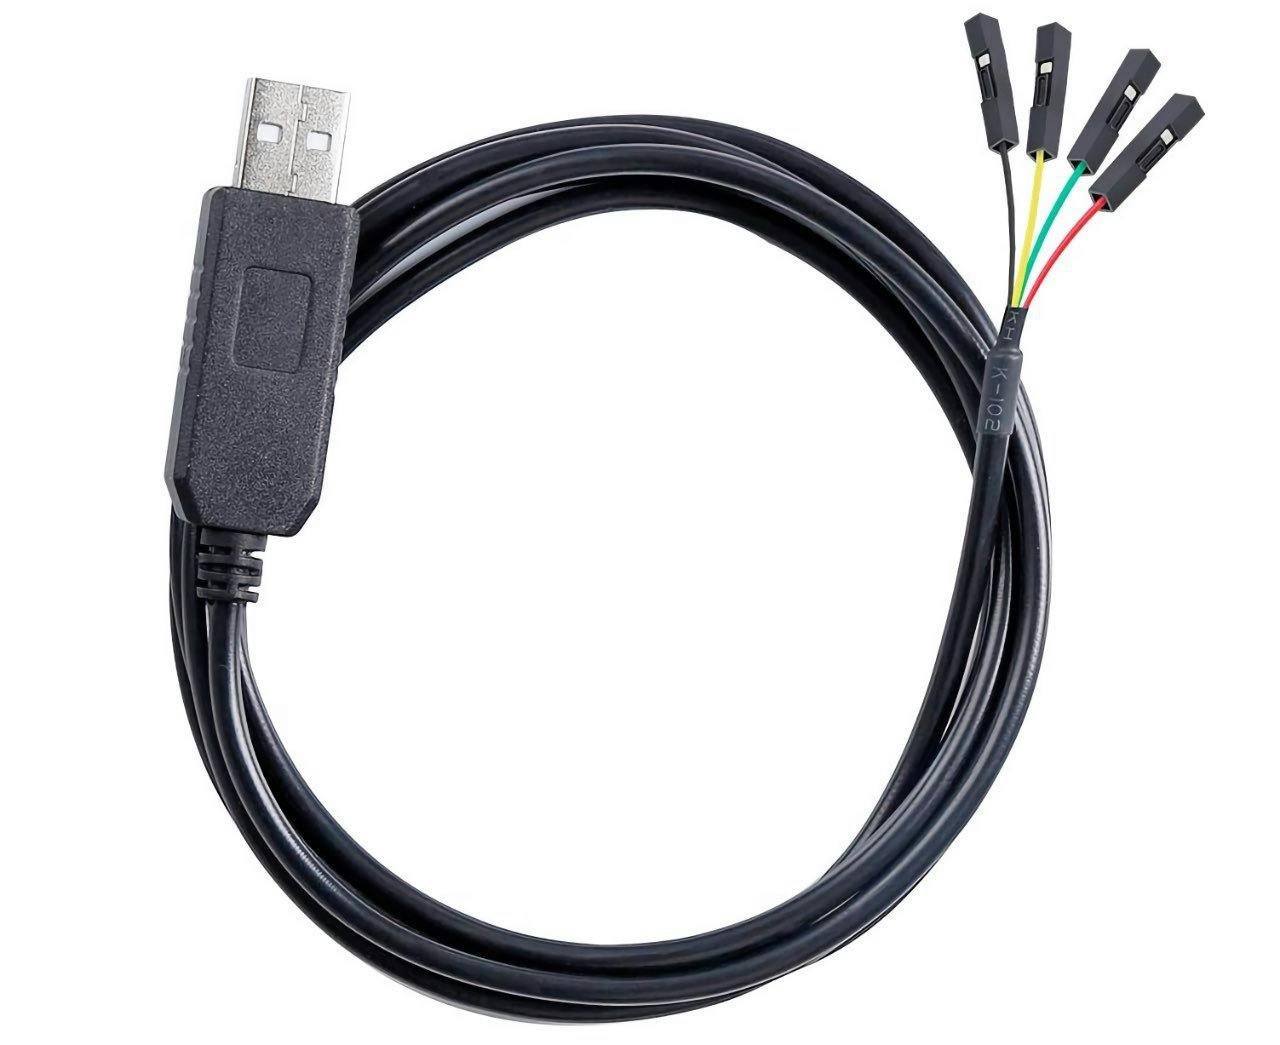 A typical FTDI serial cable.